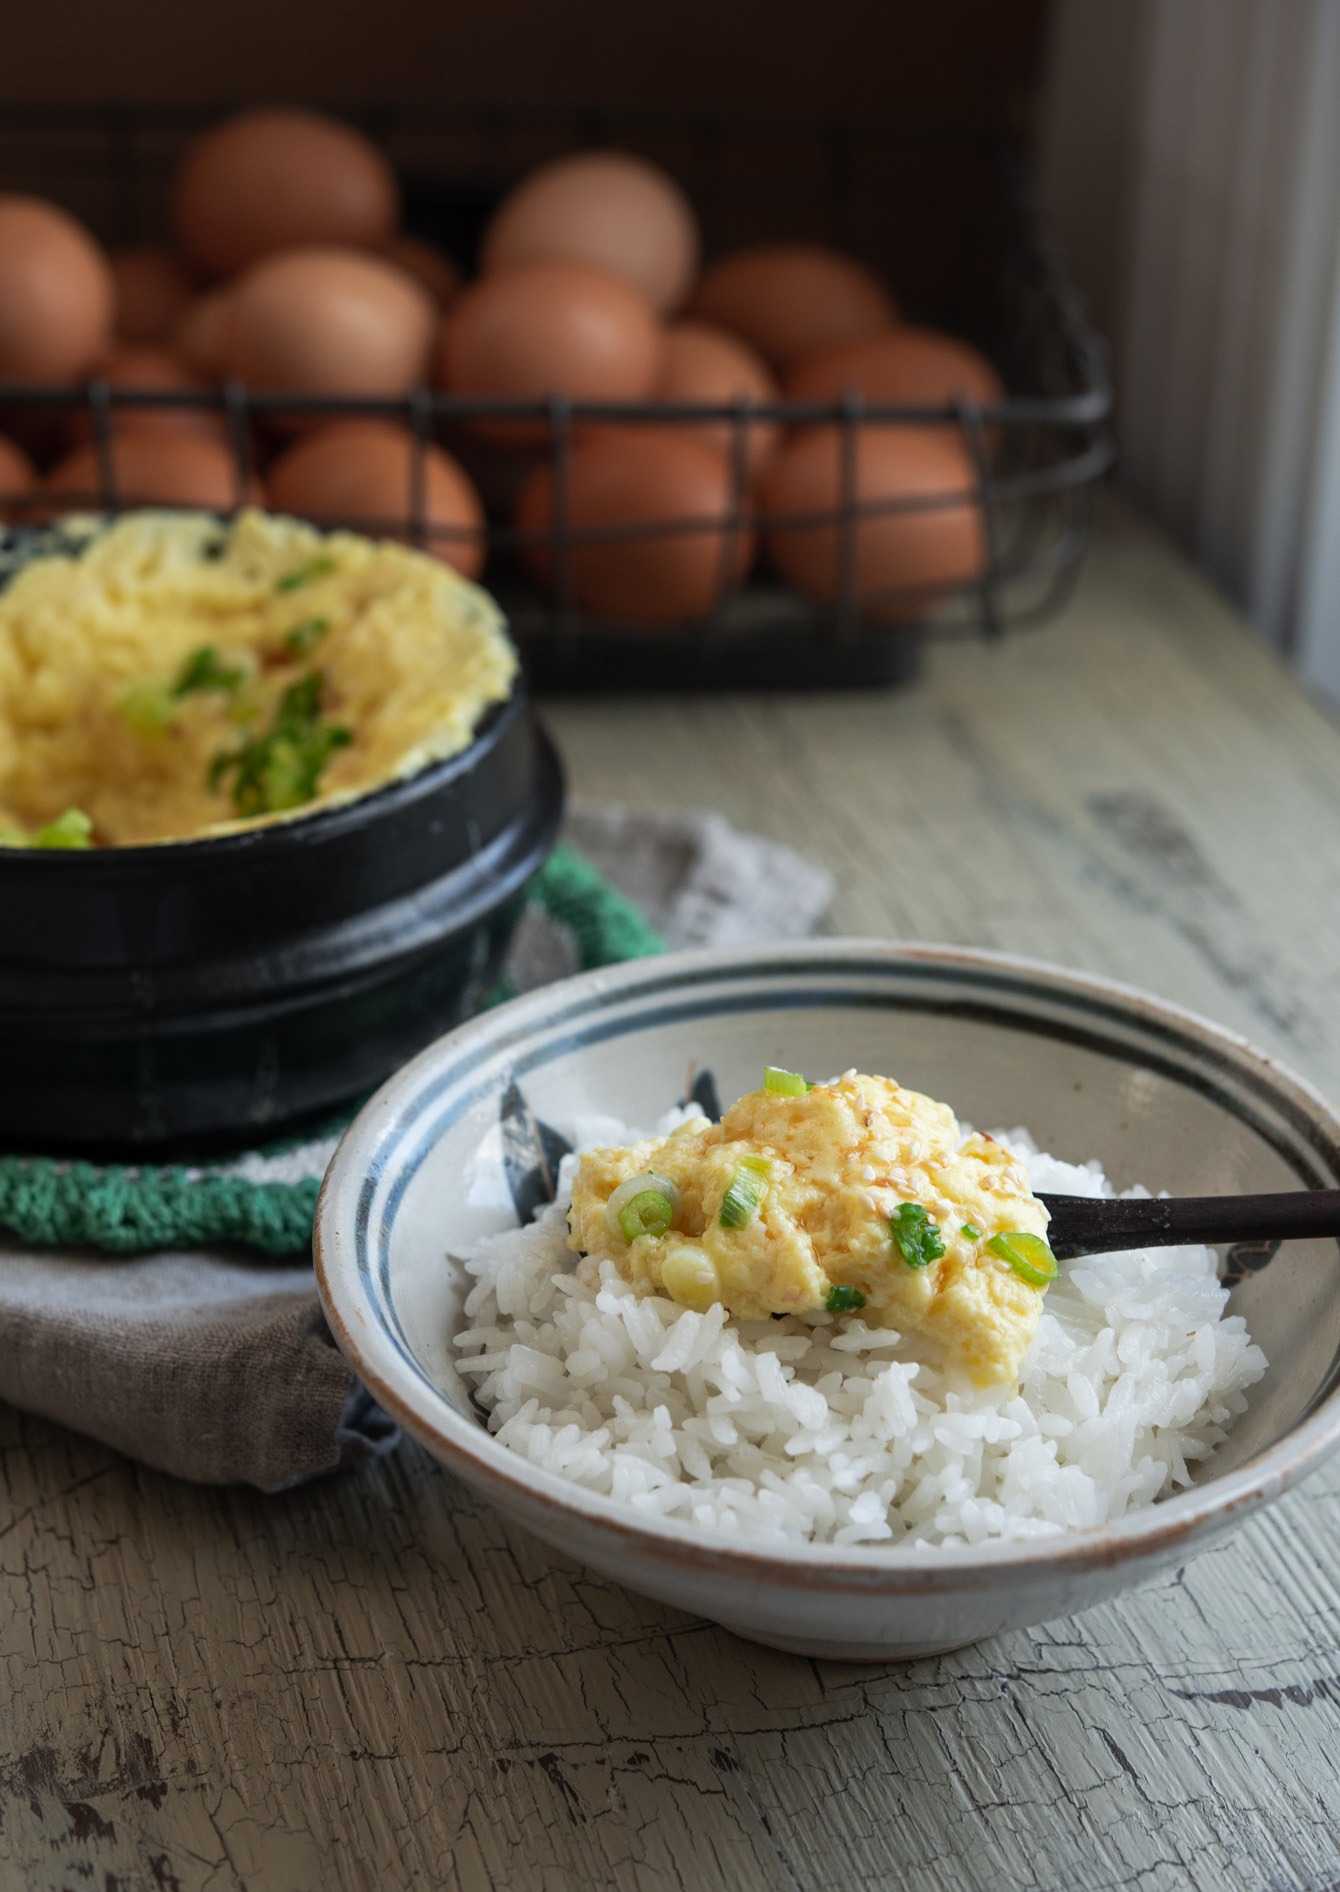 Soft and smooth Korean teamed egg served with rice.